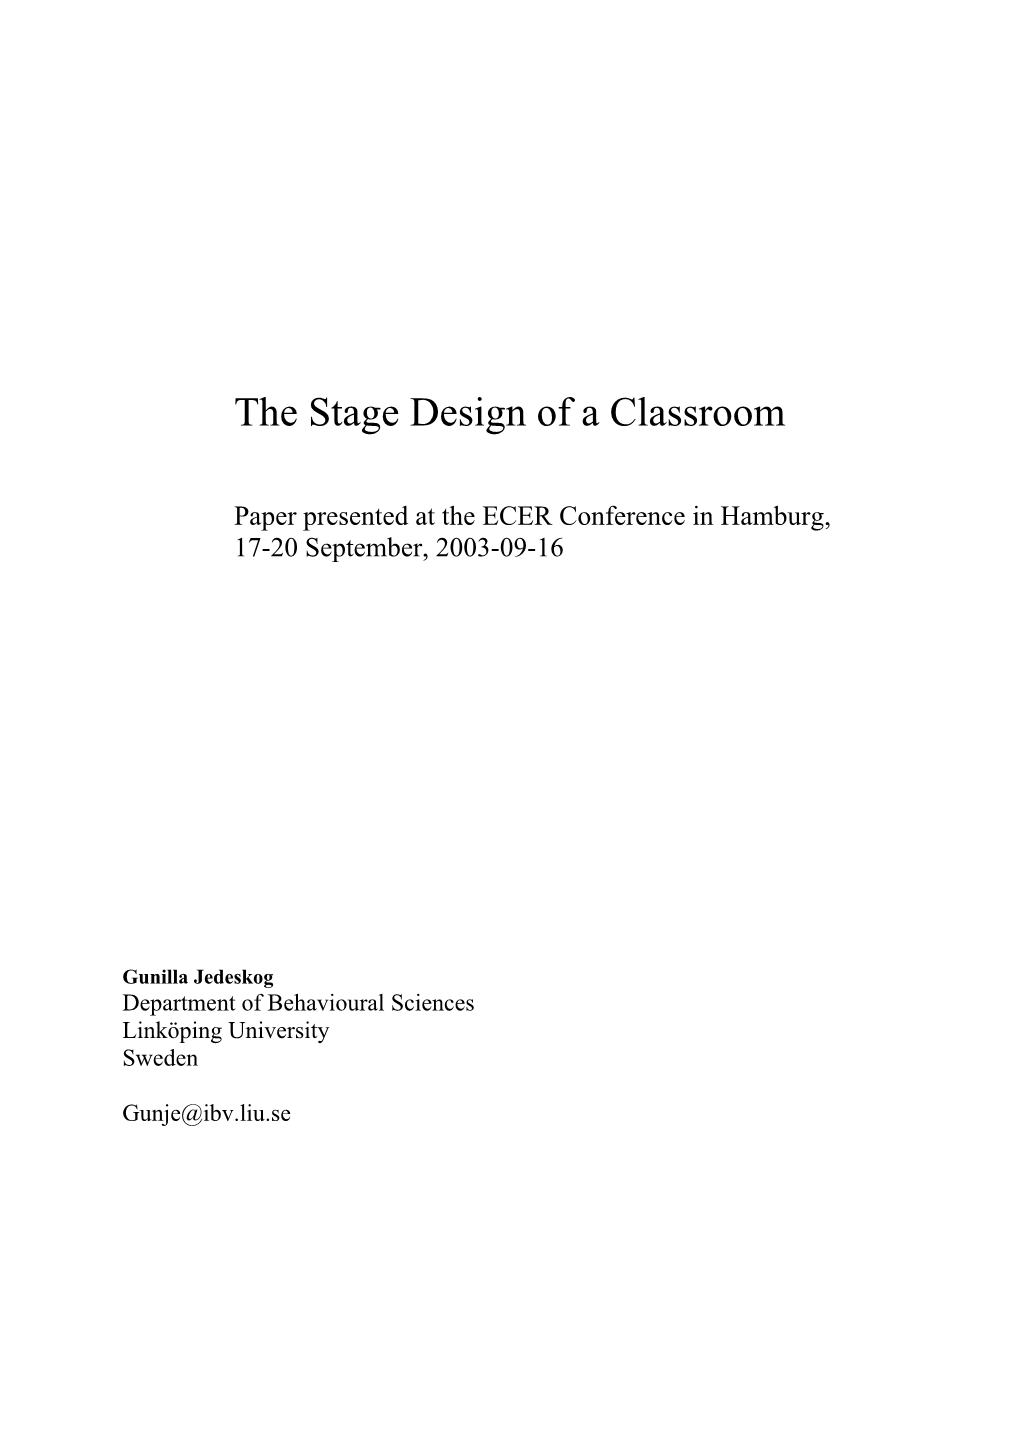 The Stage Design of a Classroom